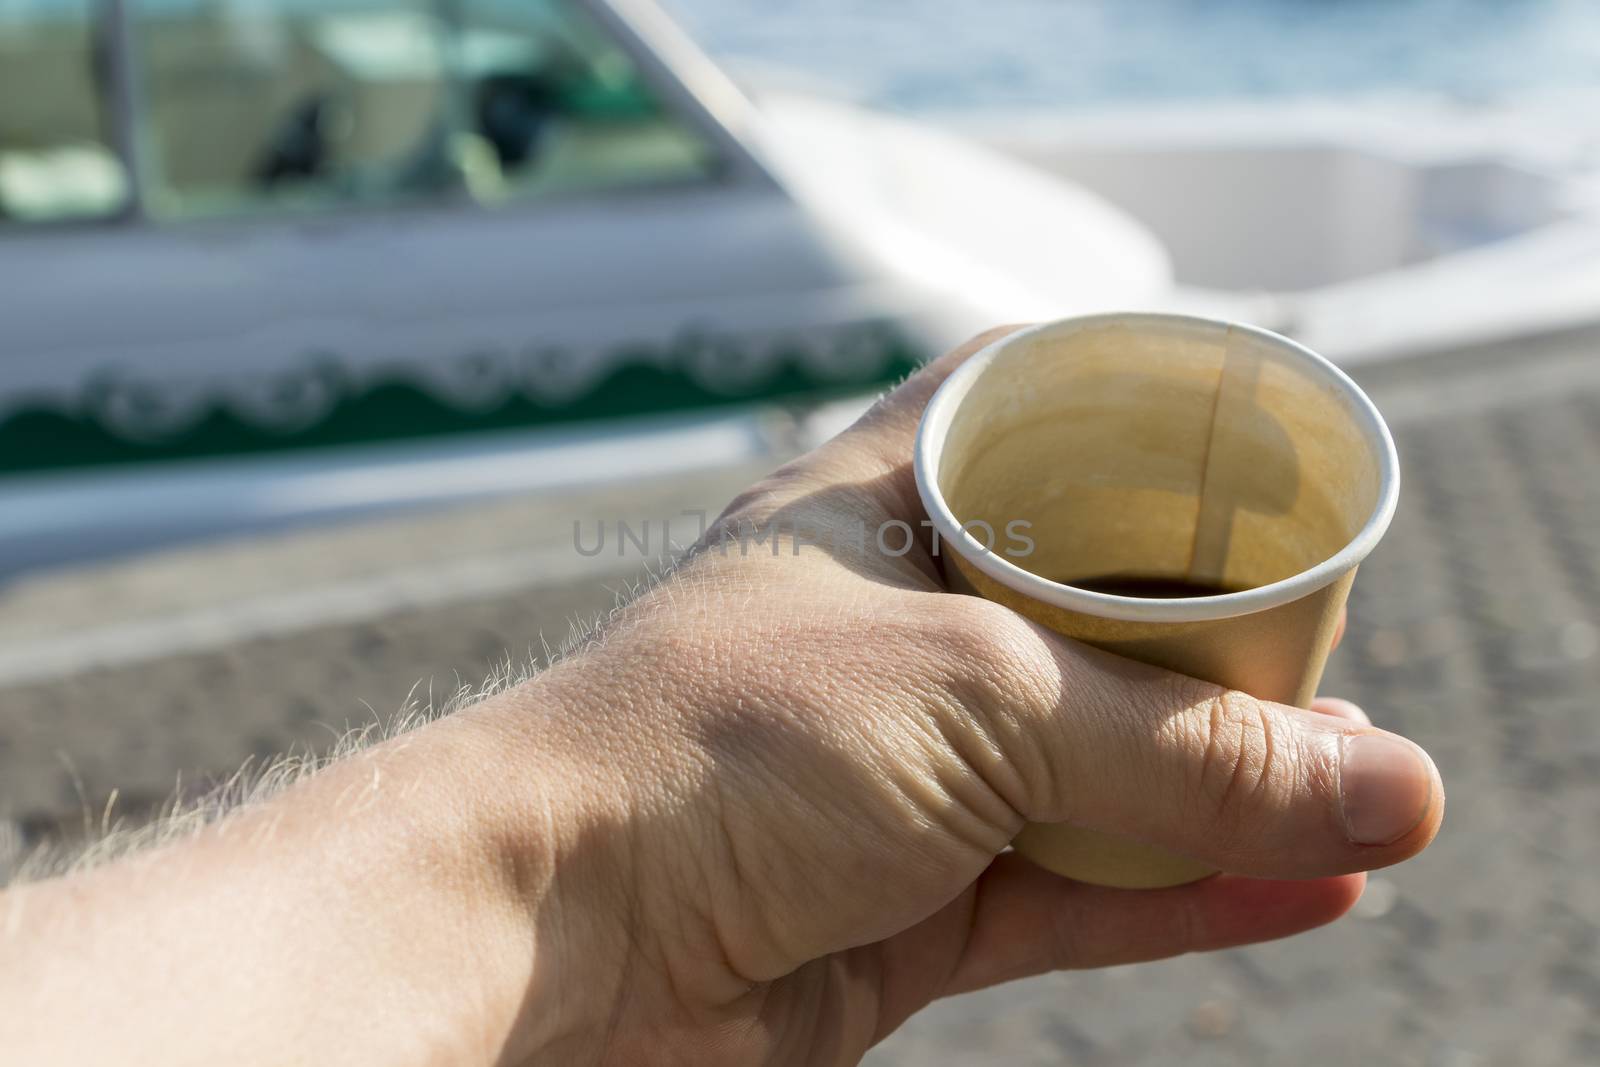 Smallest coffee in the world in Malé in the Maldives. Man holds coffee mug in hand.